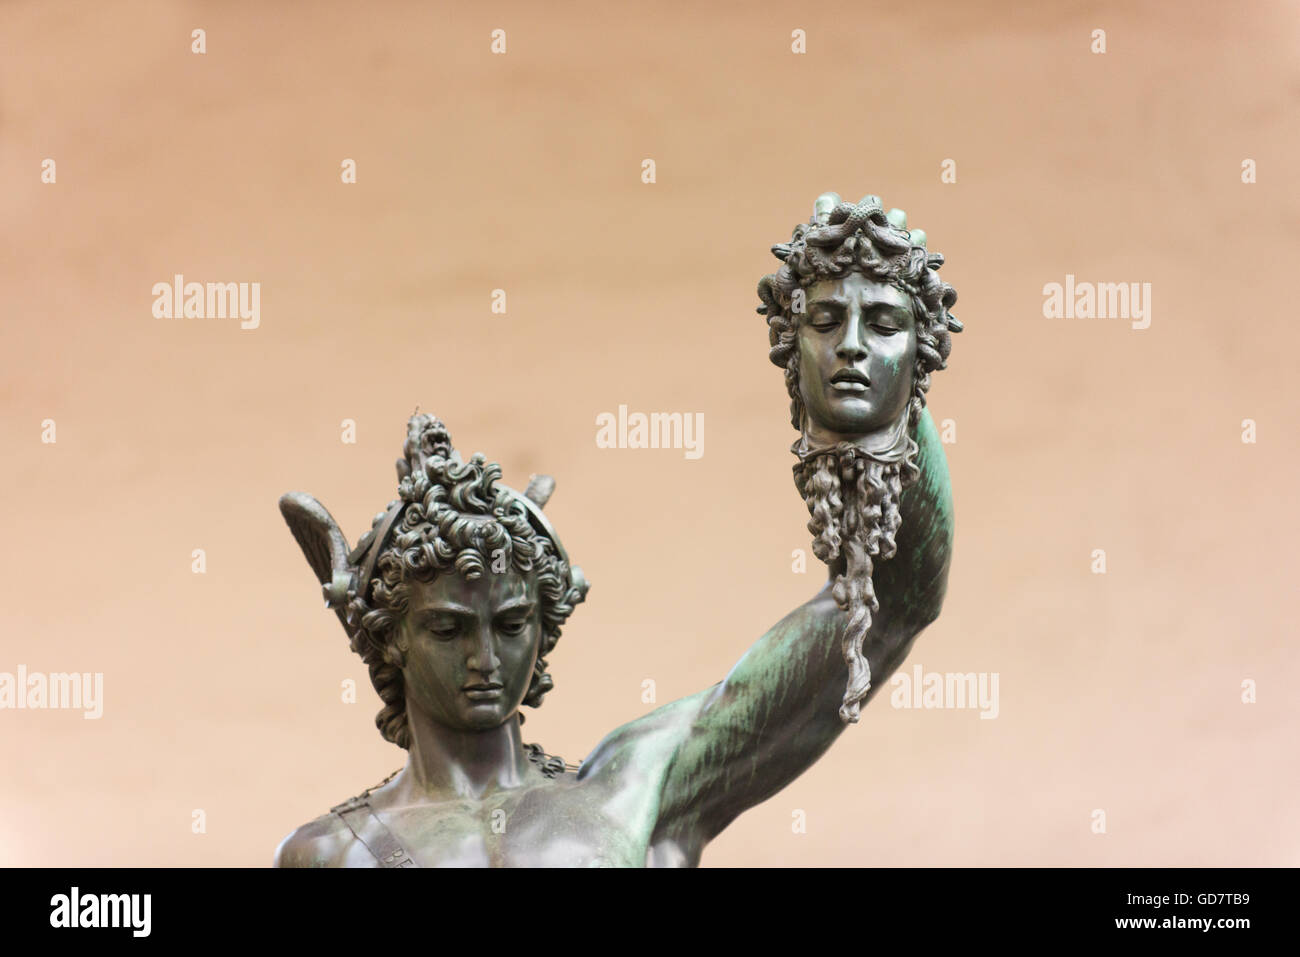 Perseus with the Head of Medusa by Benvenuto Cellini, a bronze statue in Florence. Stock Photo